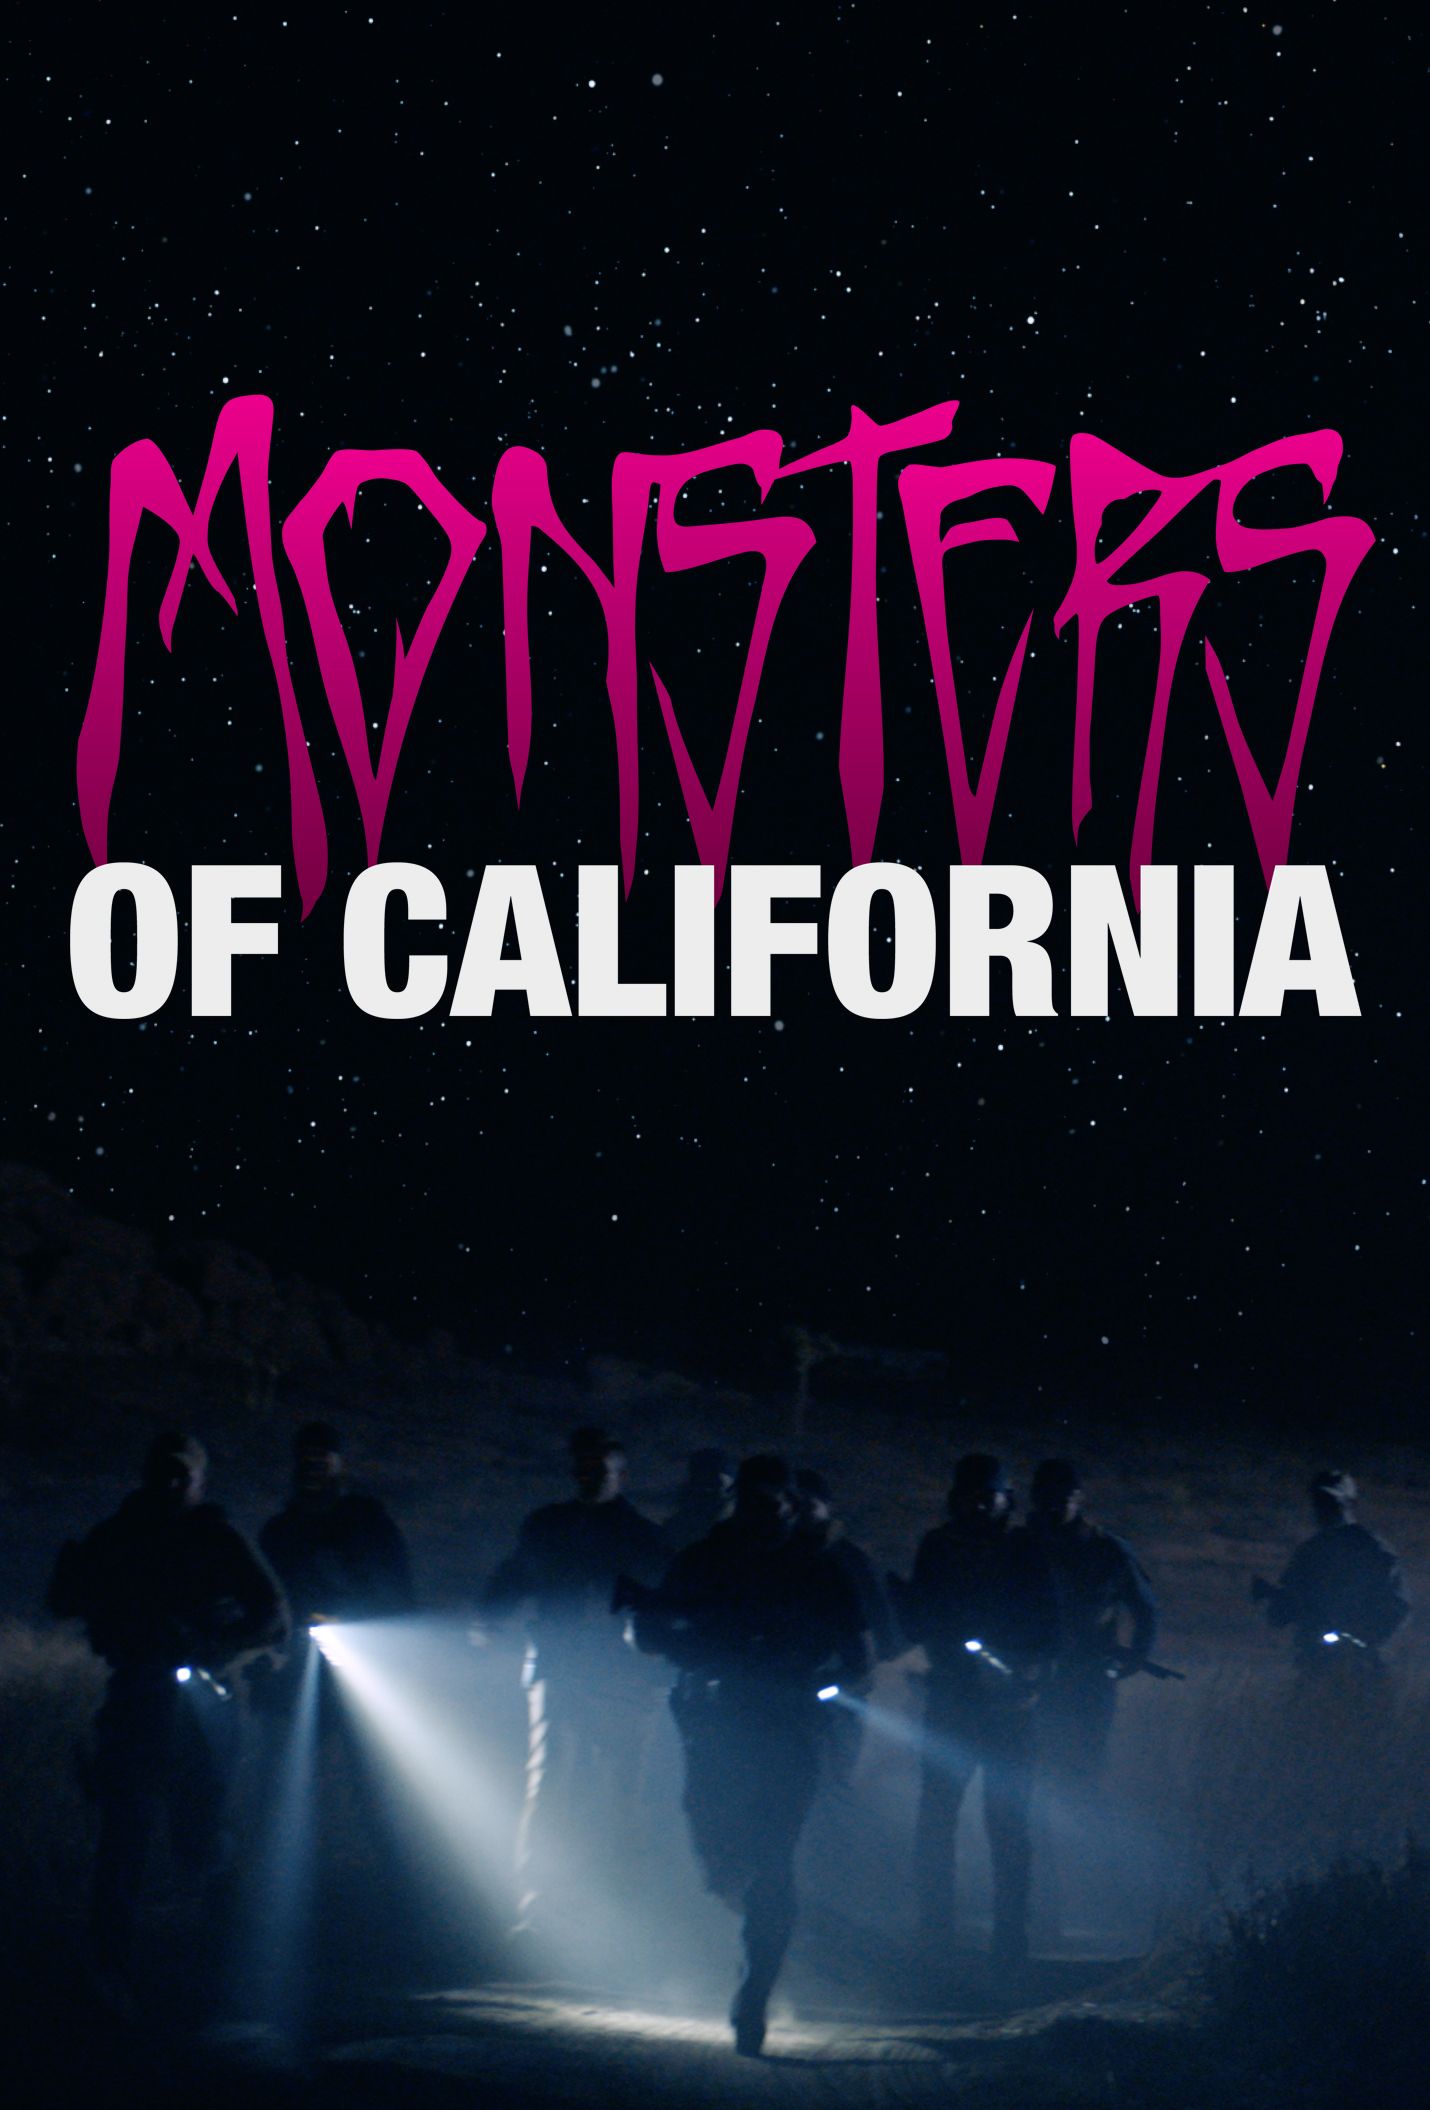 monsters of california (2021) MovieWeb